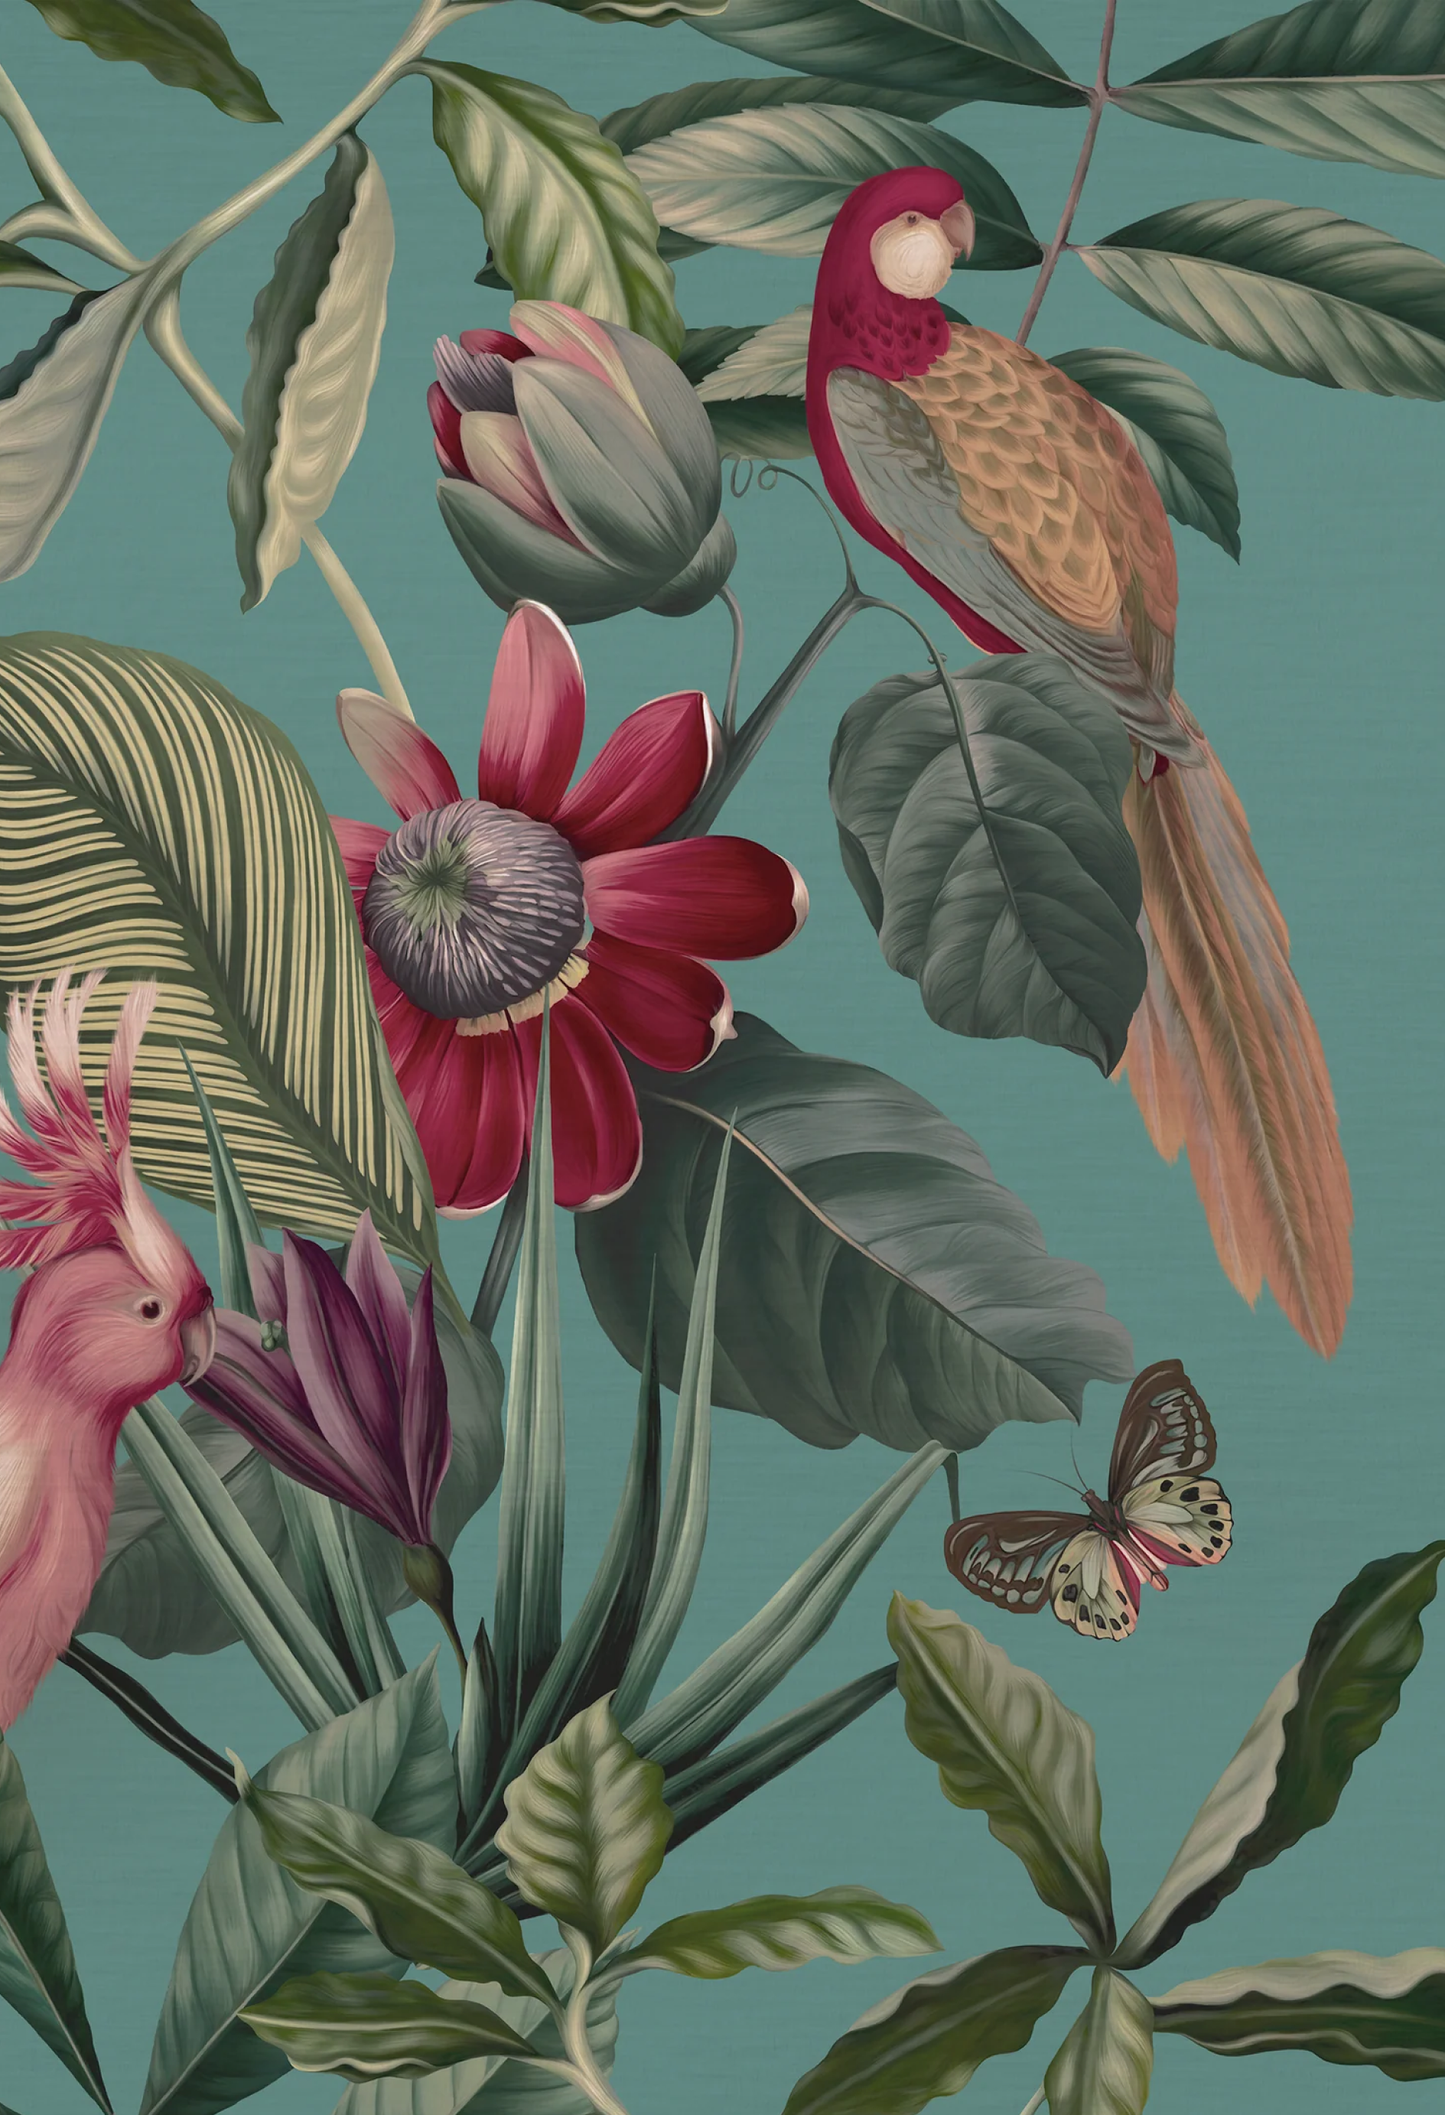 Passion fruit flower with parrot, cockatoo and butterfly surrounded by a canopy on a blue background wallpaper from Deus Ex Gardenia in Passiflora's Vardo in Superwide. 